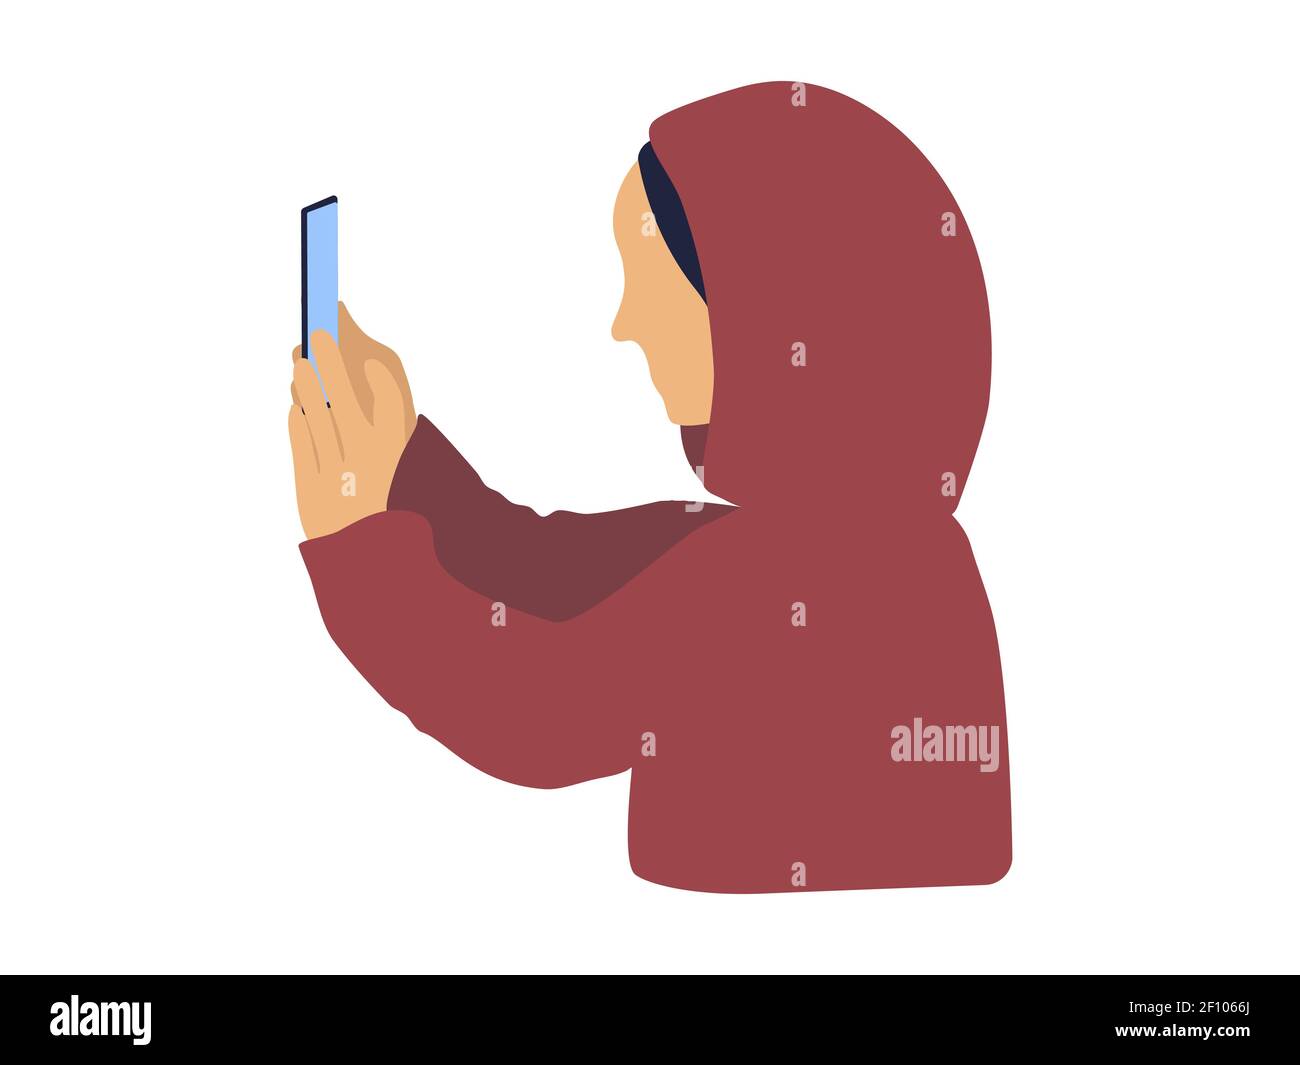 Woman wearing hijab using her phone illustration. Arab modern woman using technology, social media icon. Isolated on a wite background. Vector. Stock Vector